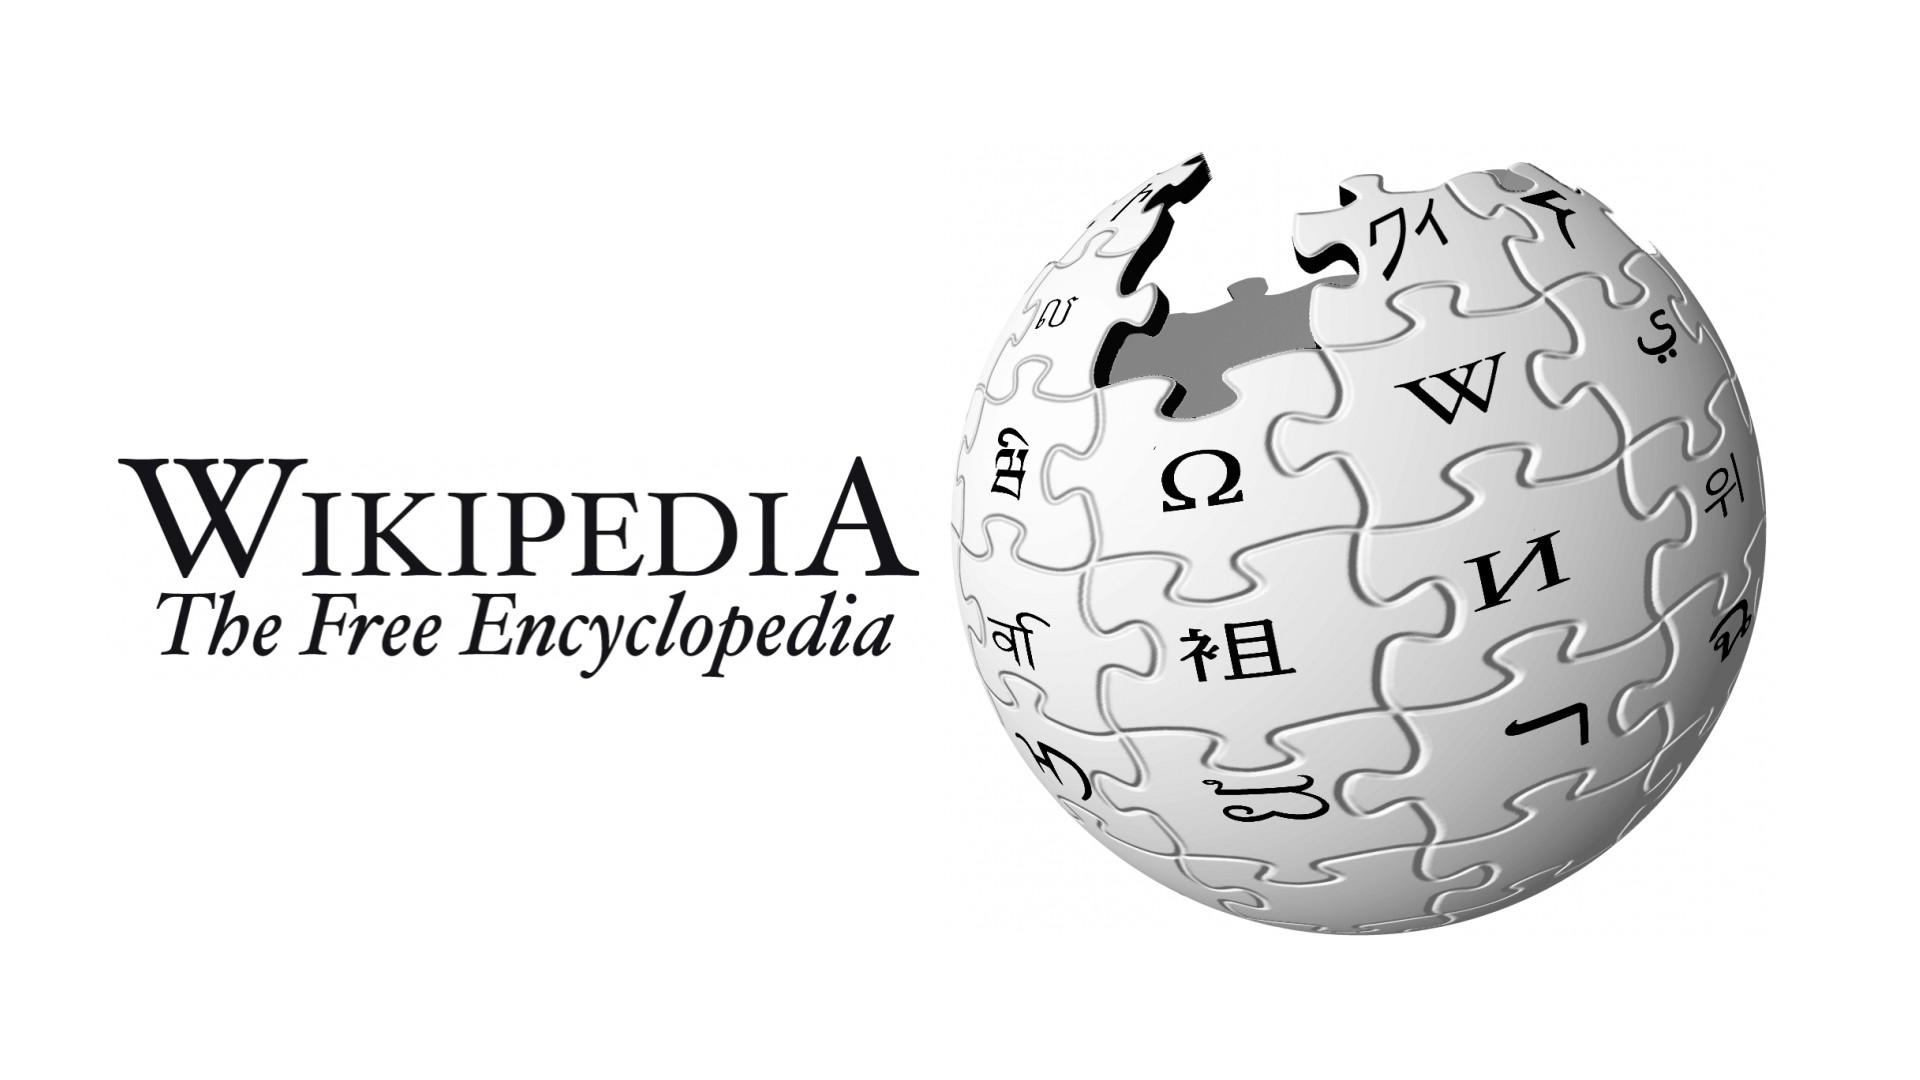 $4000 donation to Wikipedia, the world's largest free encyclopedia ...